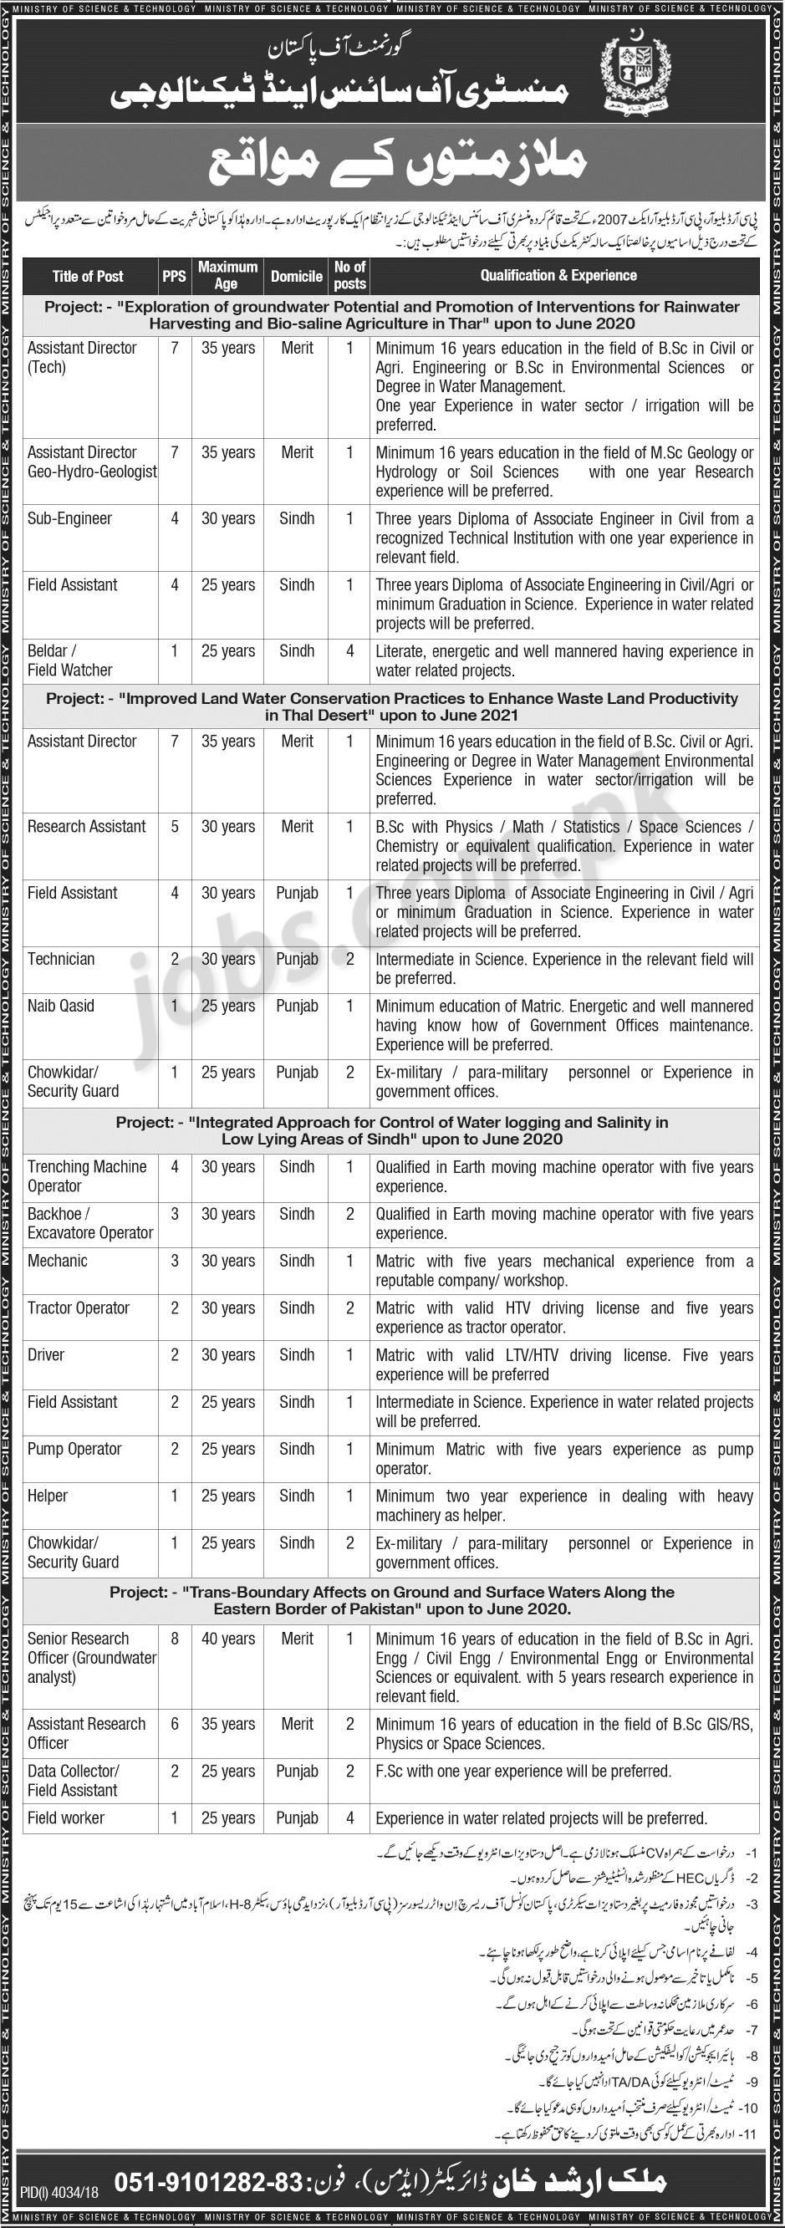 Ministry of Sciences & Technology Pakistan Jobs 2019 for 37+ Posts (Multiple Categories)